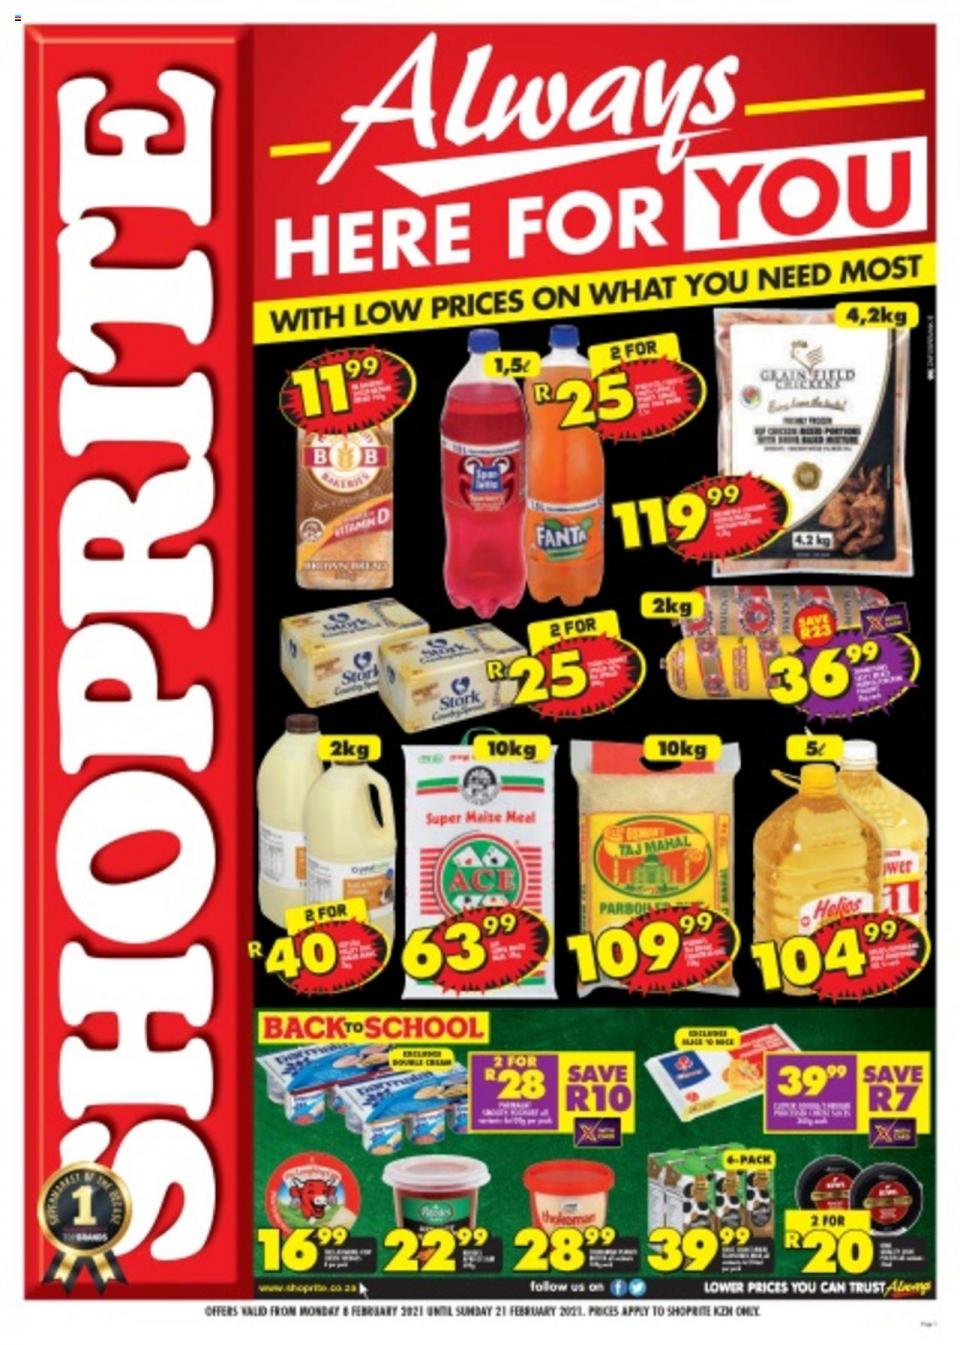 Shoprite Specials Always Here For You 8 February 2021